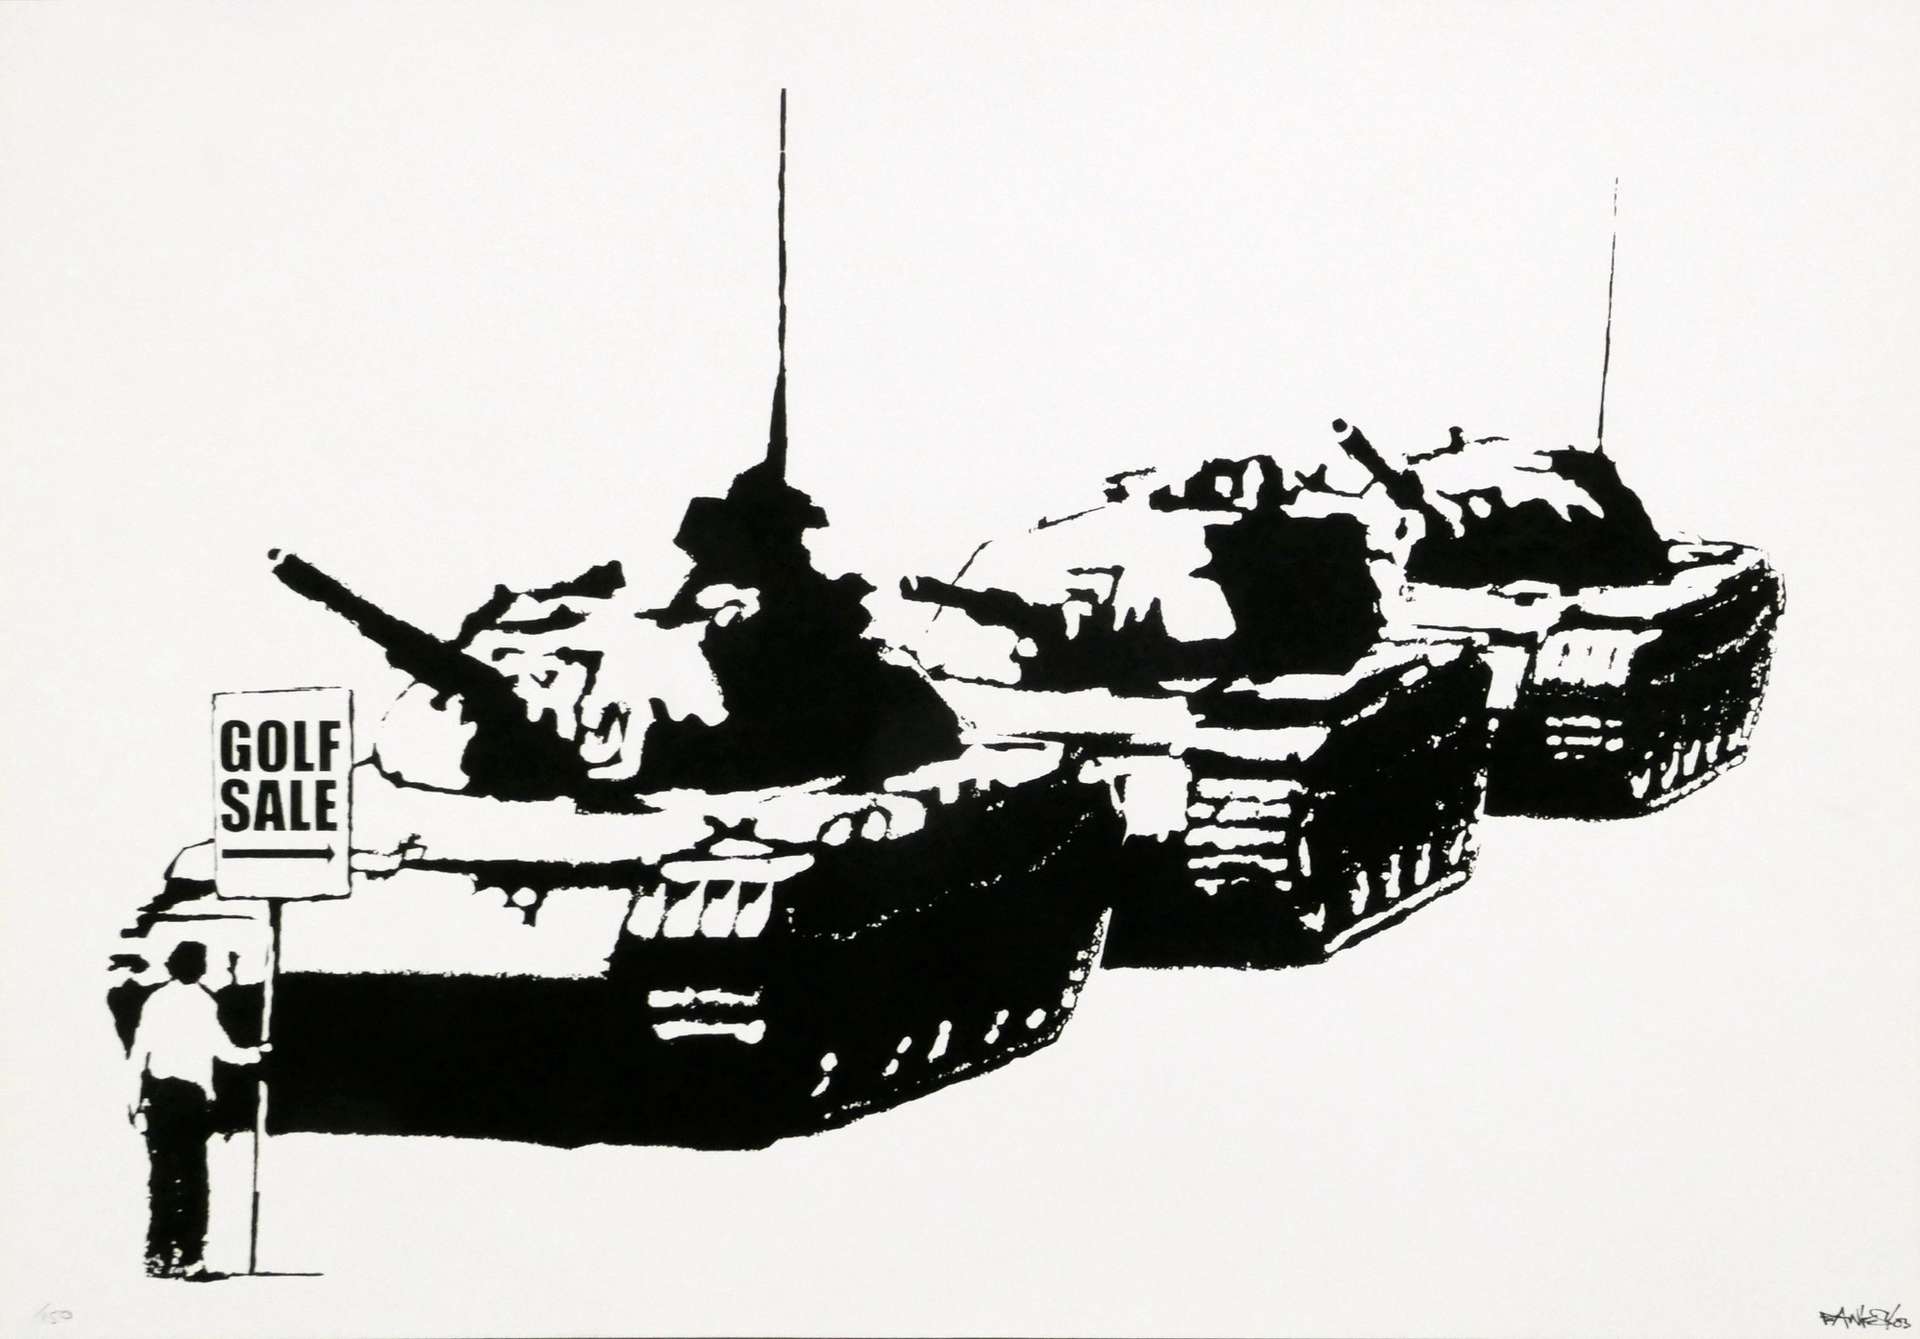 A monochrome print by Banksy showing a man purposefully blocking the path of three military tanks, similar to Tank Man in Tiananmen Square..